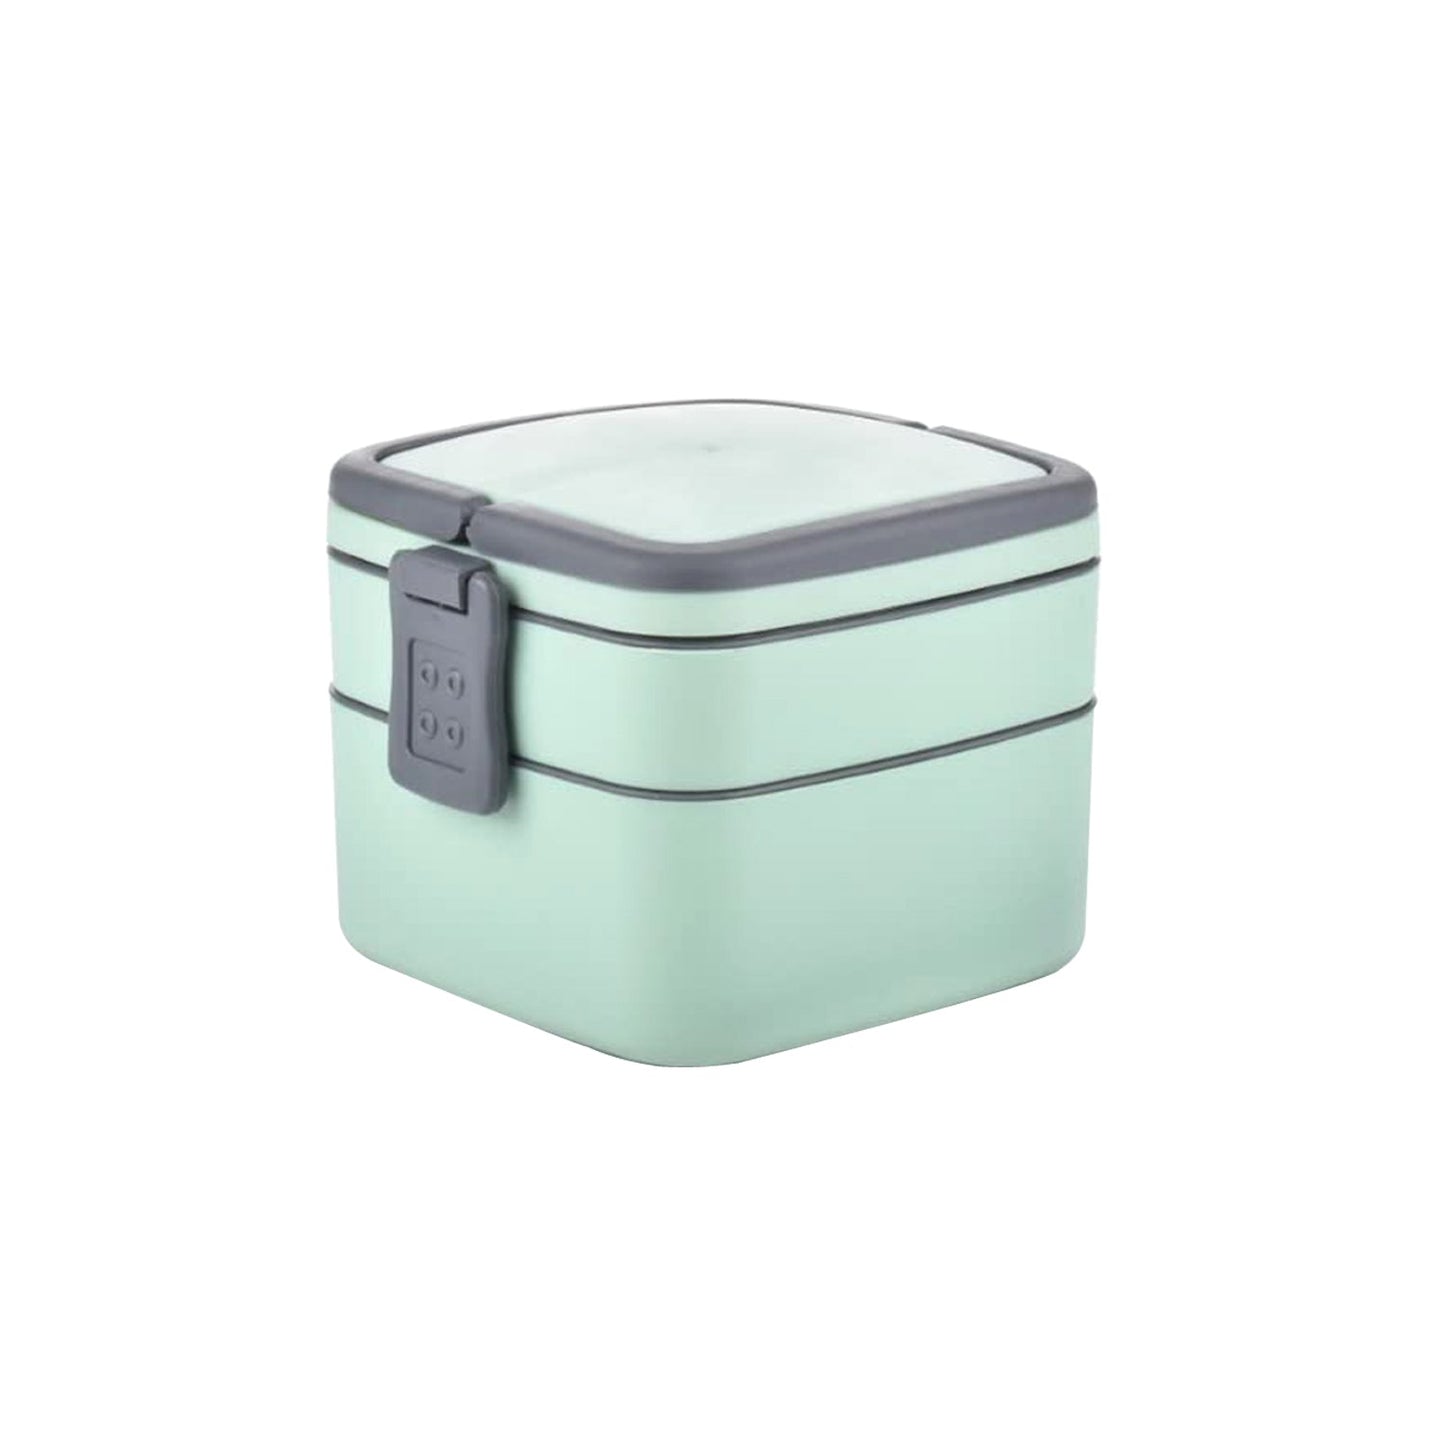 2837A GREEN DOUBLE-LAYER PORTABLE LUNCH BOX STACKABLE WITH CARRYING HANDLE AND SPOON LUNCH BOX , Bento Lunch Box Dukandaily